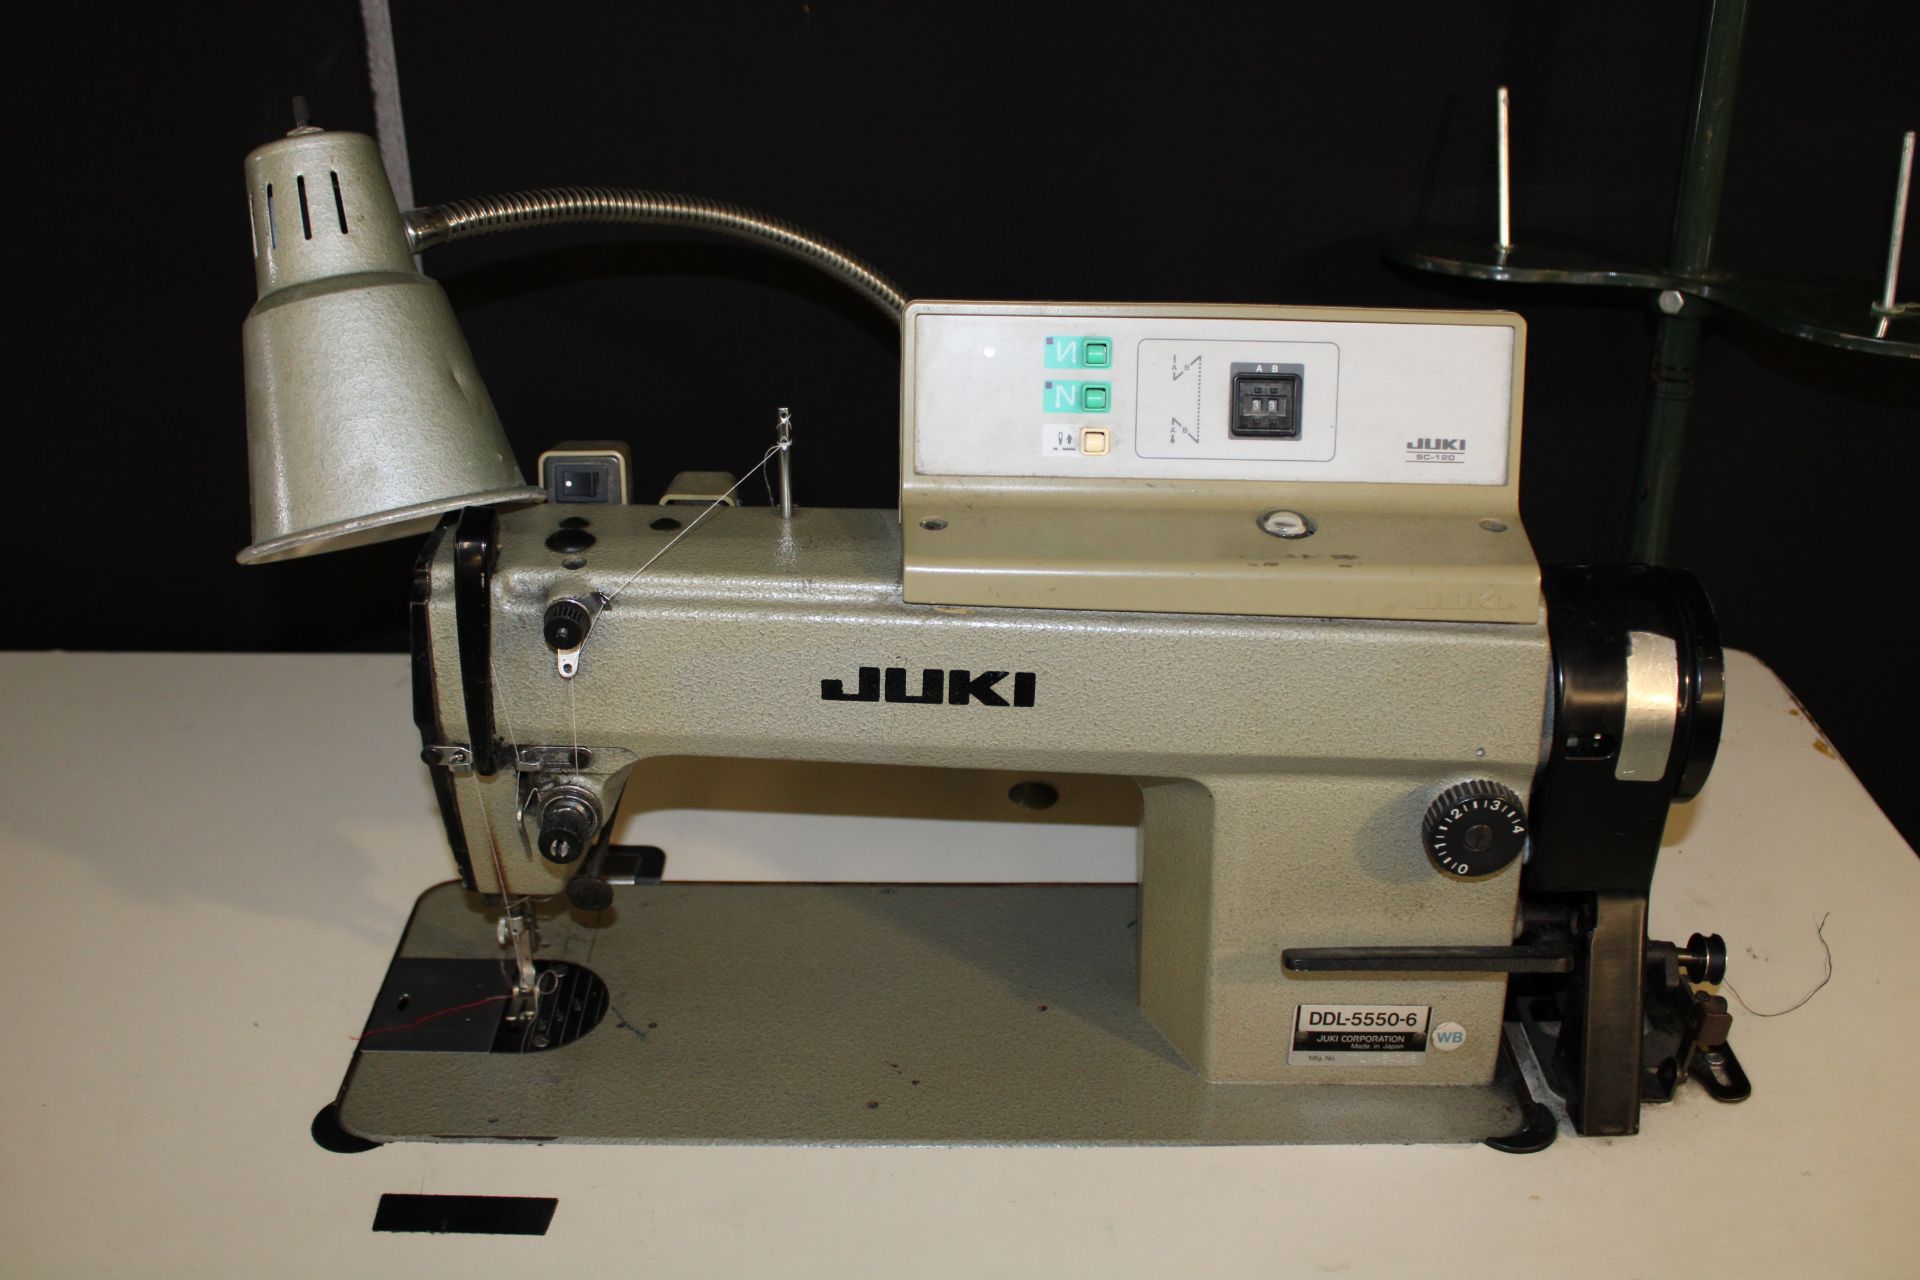 JUKI mod. DDL-5550-6, SC-120 industrial sewing machine, 110V, P/T/AIR FOOT LIFT - Image 3 of 5